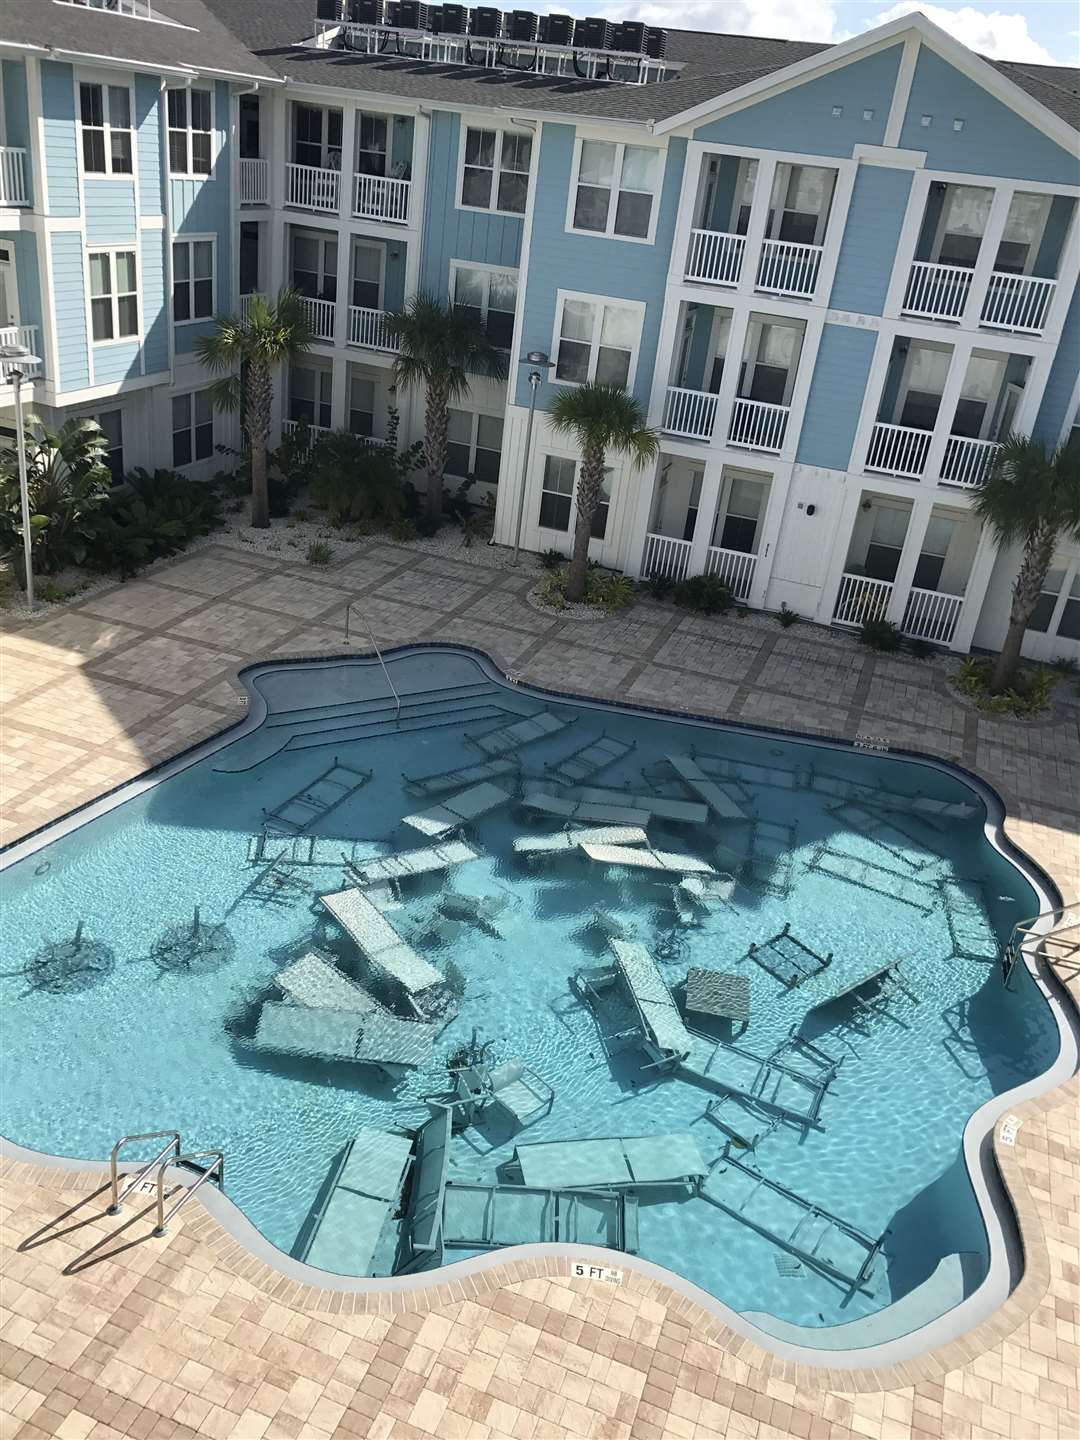 Aftermath at an apartment complex following a previous weather event in Florida.